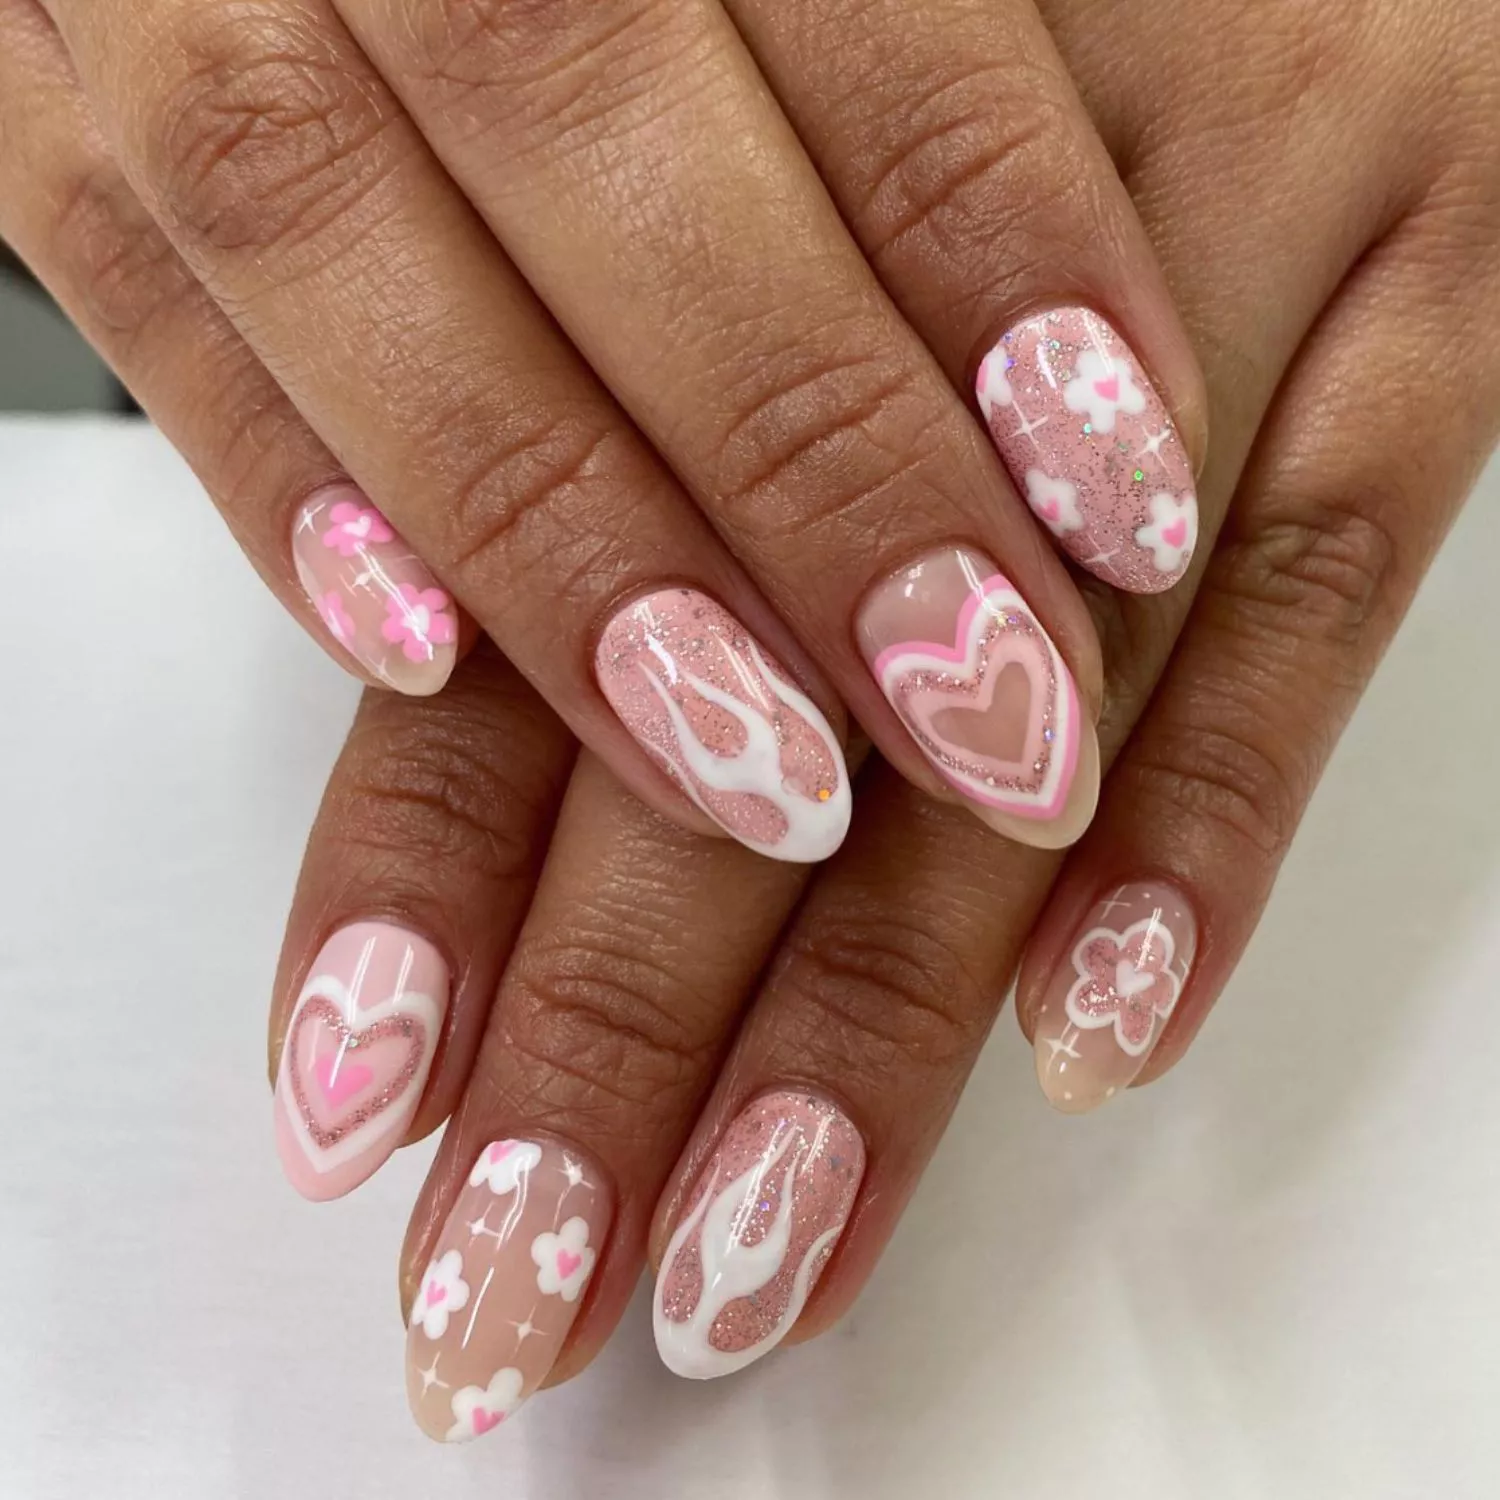 Pink and white manicure with assorted flower, flame, and heart designs